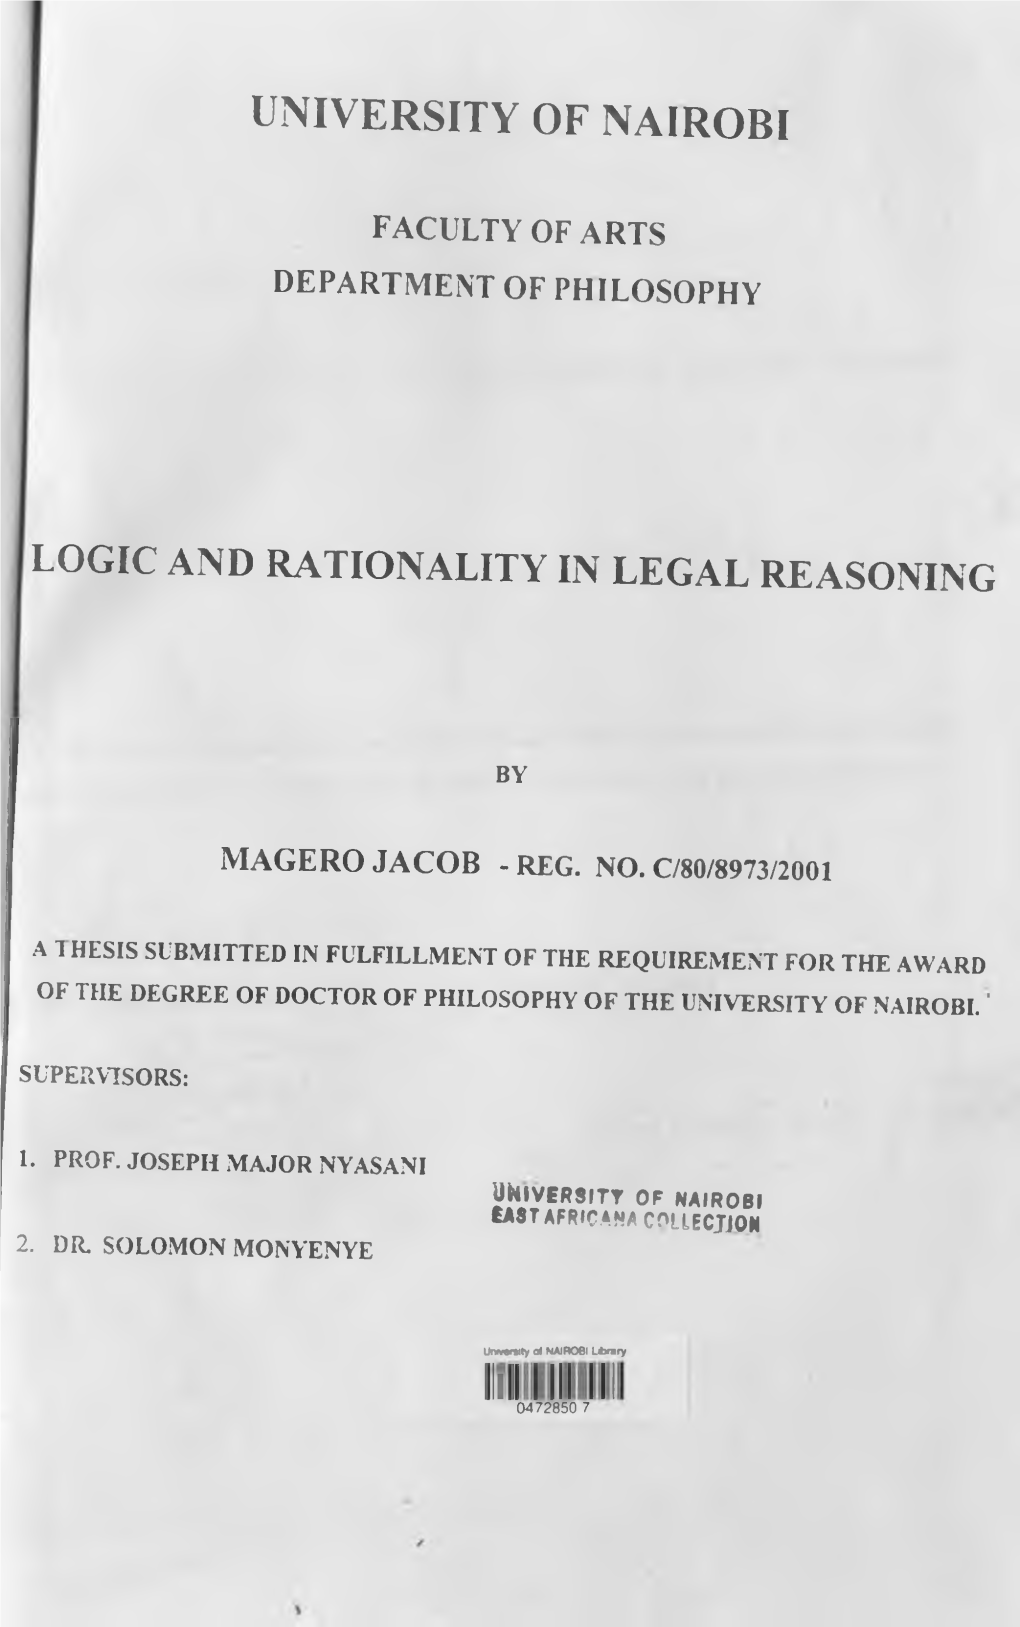 Logic and Rationality in Legal Reasoning